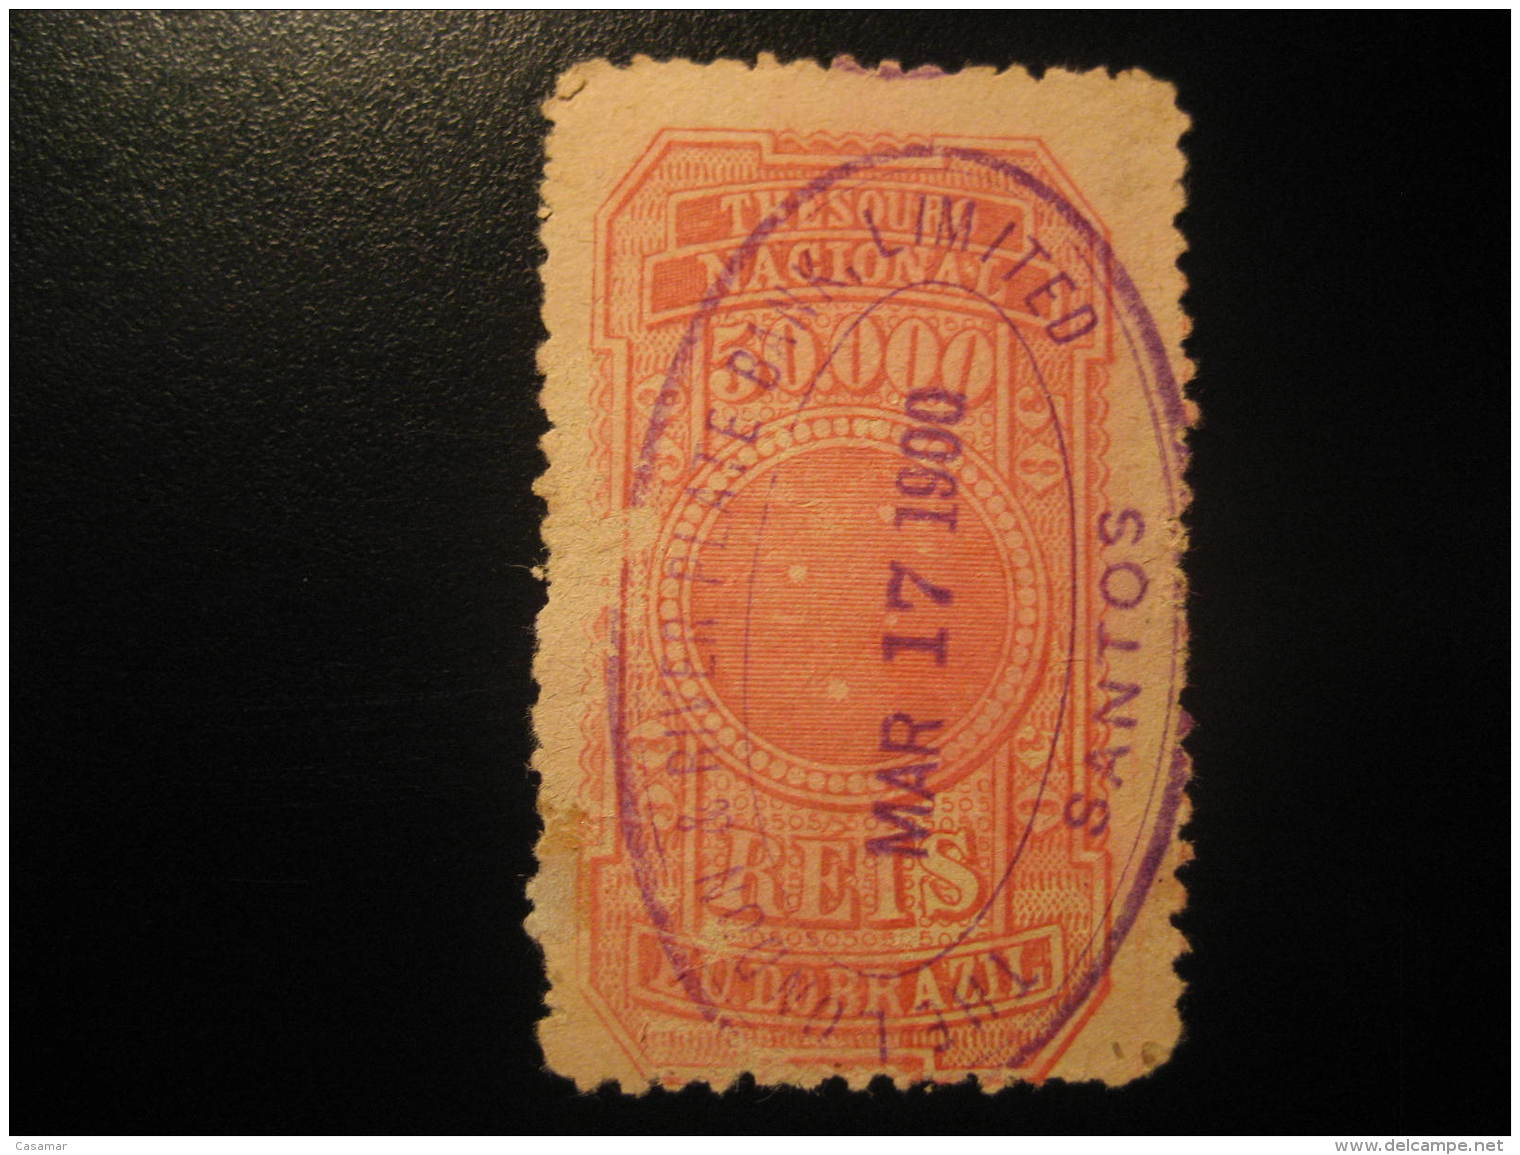 1900 SANTOS 50.000 Reis Thesouro Federal Revenue Fiscal Tax Postage Due Official Brazil Brasil - Postage Due